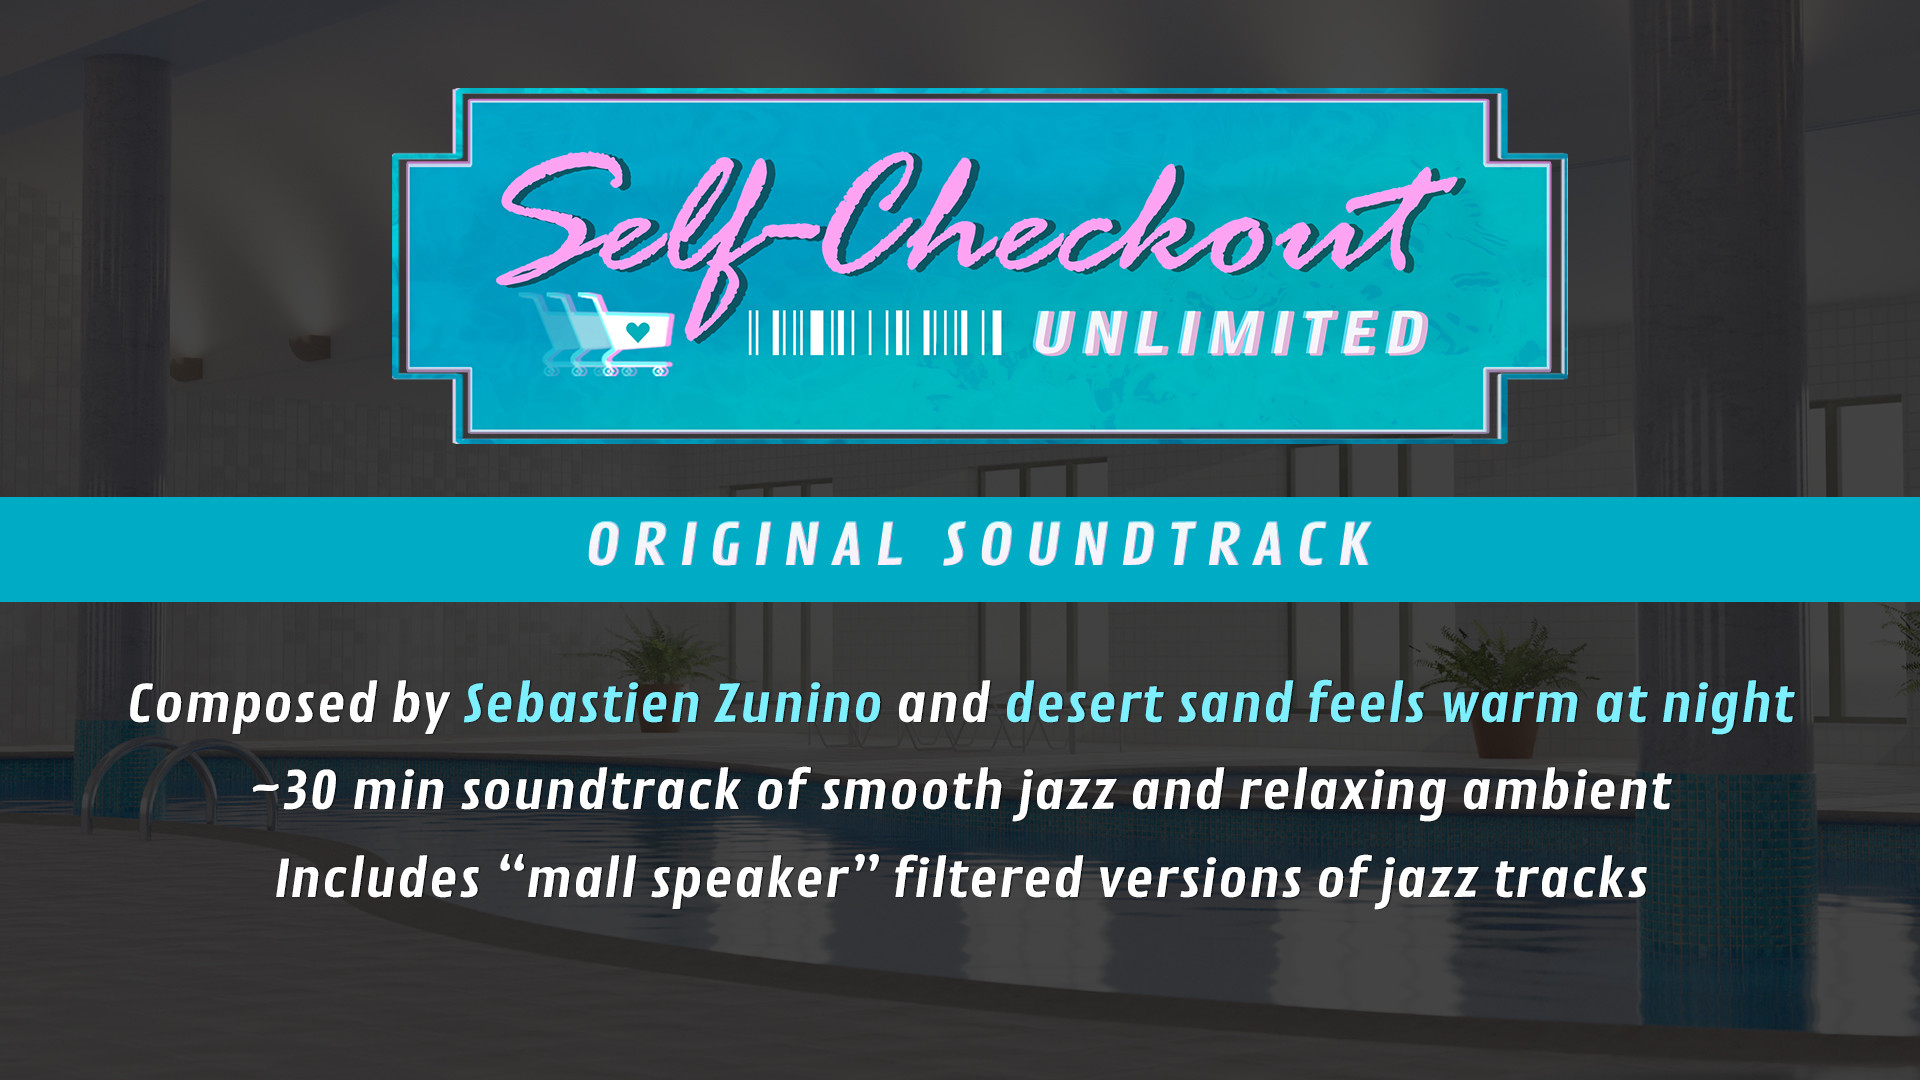 Self-Checkout Unlimited Soundtrack Featured Screenshot #1